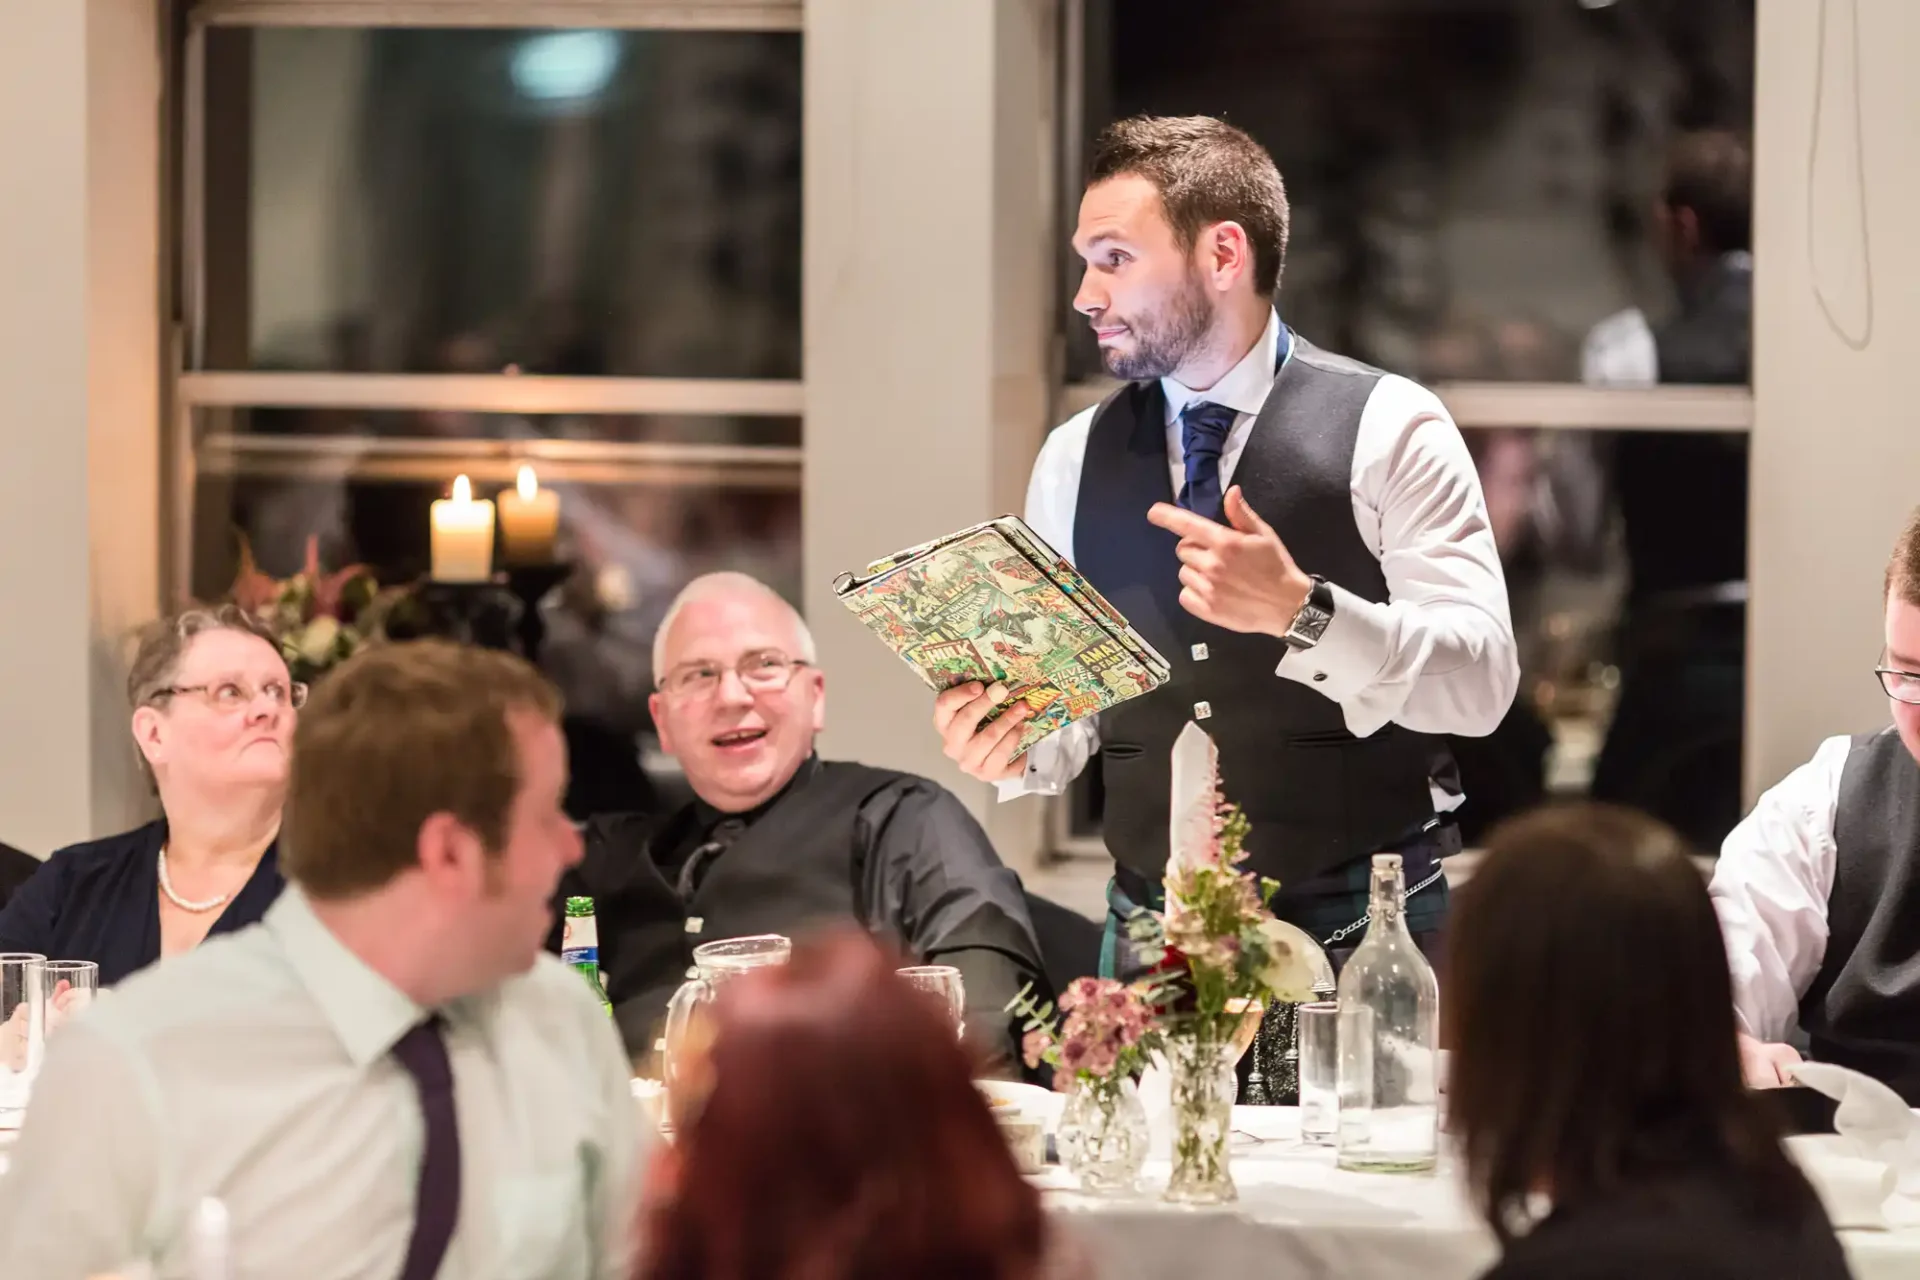 A waiter presenting a menu to diners at an elegantly set table in a restaurant, engaging in discussion with a seated couple.